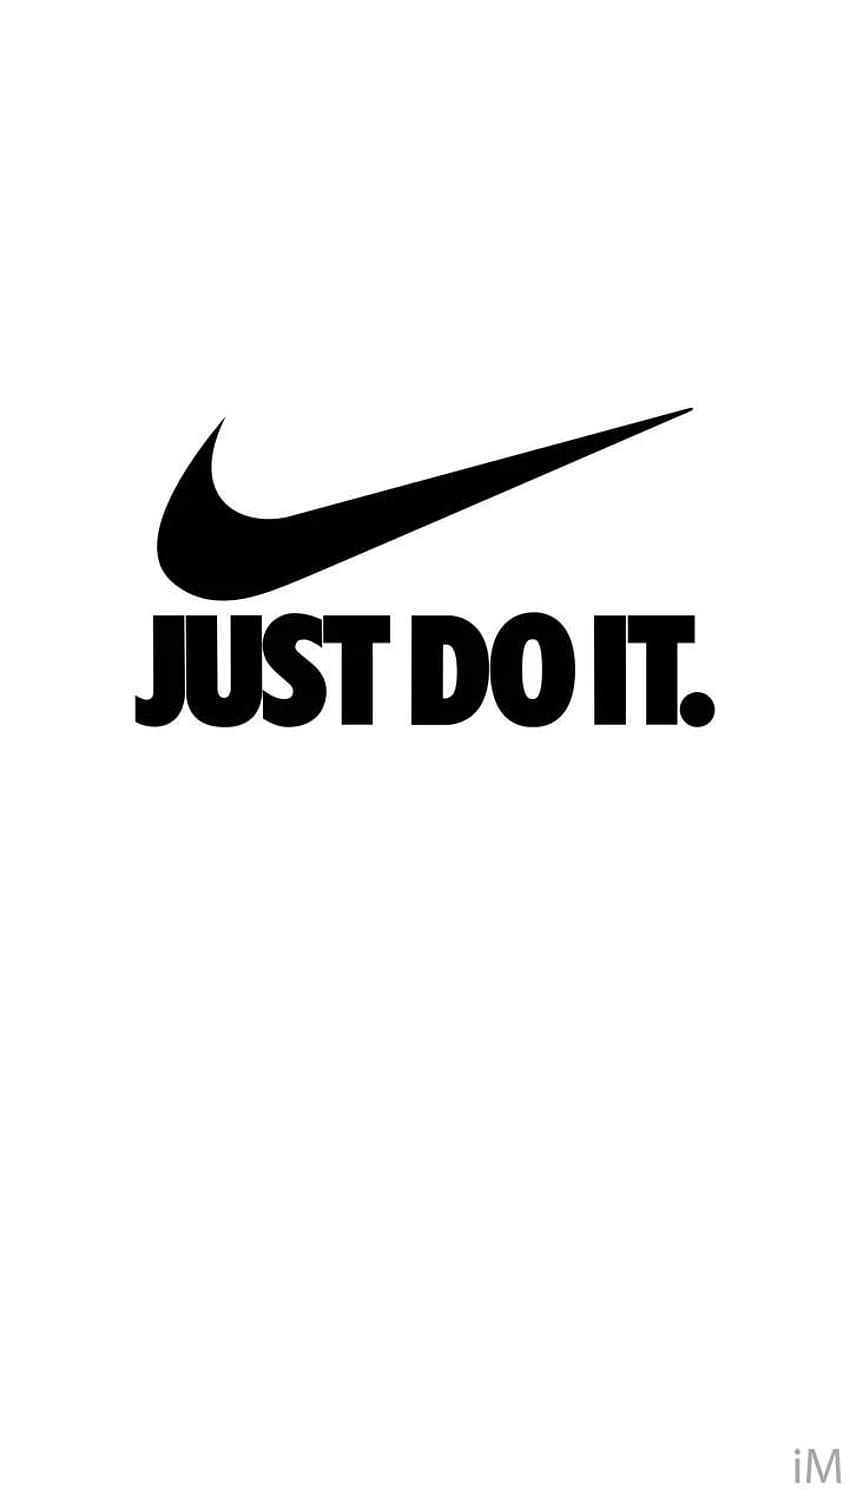 Nike Snoopy Logo Png, Nike Just Do It Logo Png, Snoopy Png, - Inspire Uplift